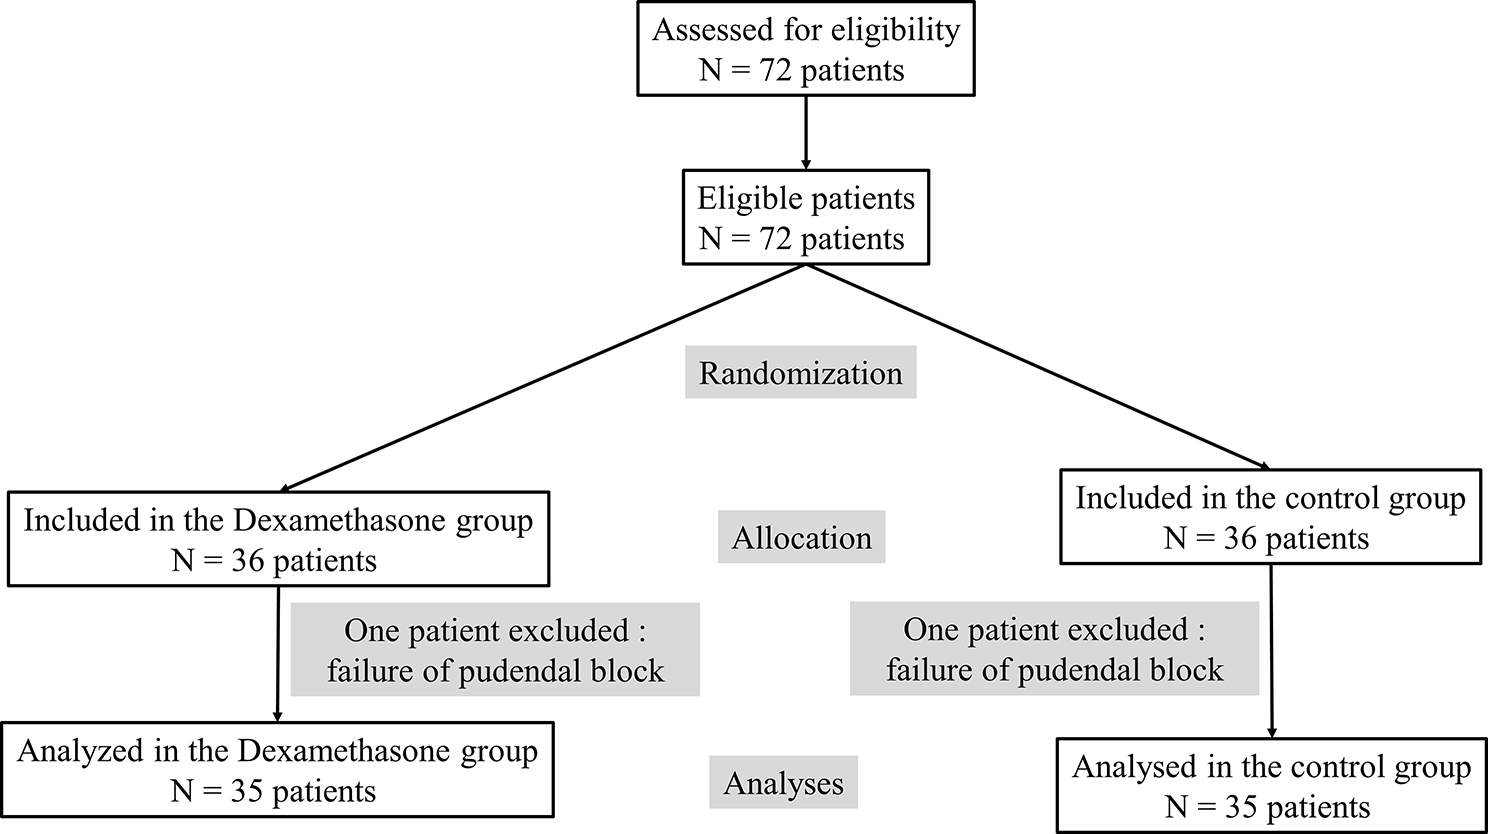 The potentiating effect of intravenous dexamethasone upon preemptive pudendal block analgesia for hypospadias surgery in children managed with Snodgrass technique: a randomized controlled study